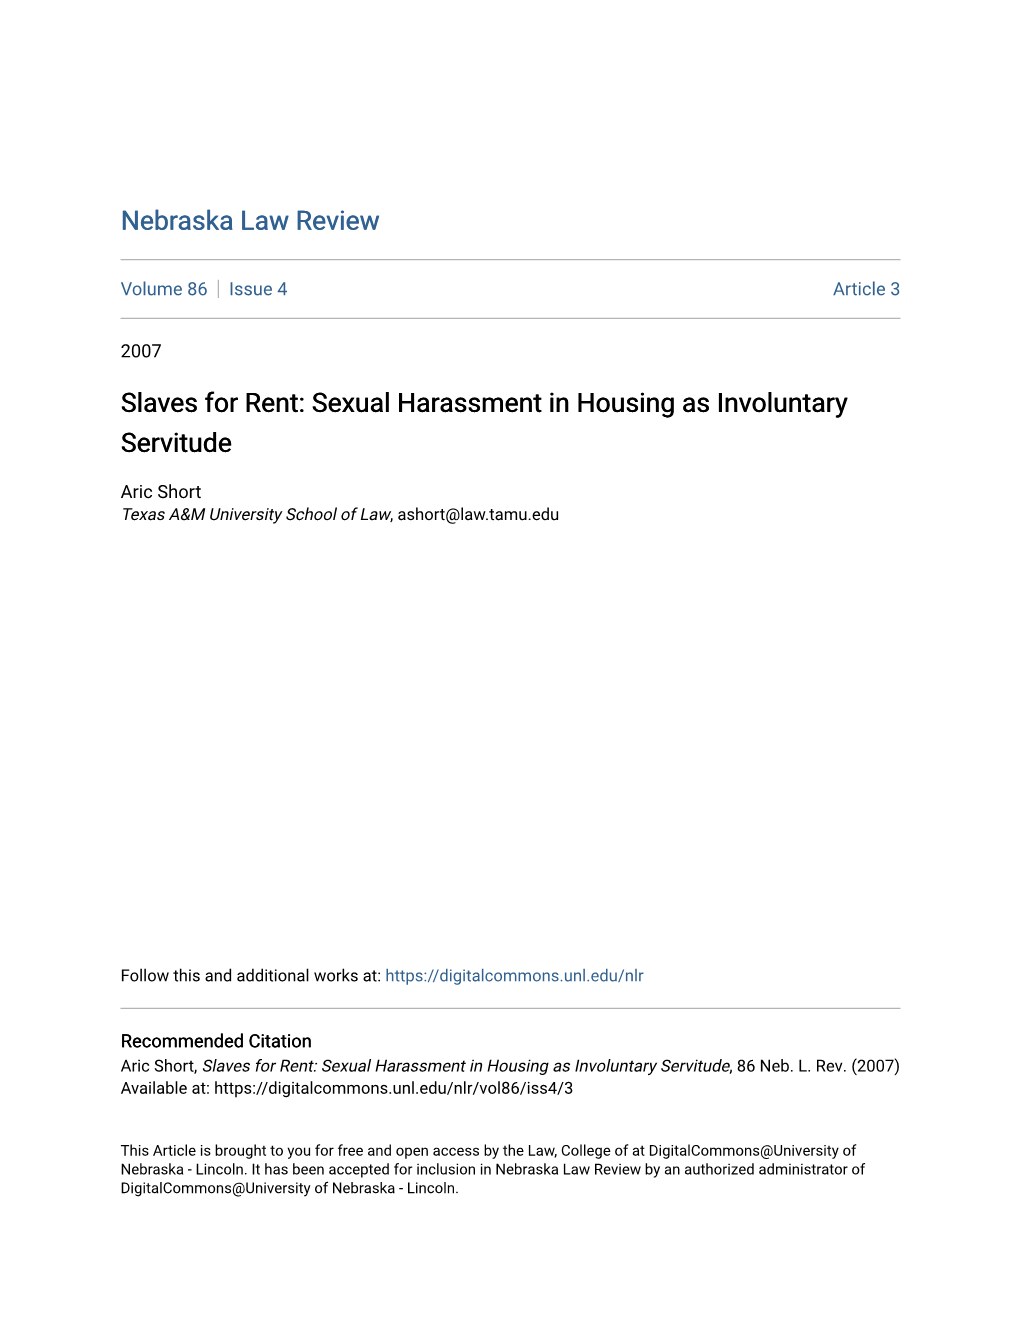 Slaves for Rent: Sexual Harassment in Housing As Involuntary Servitude